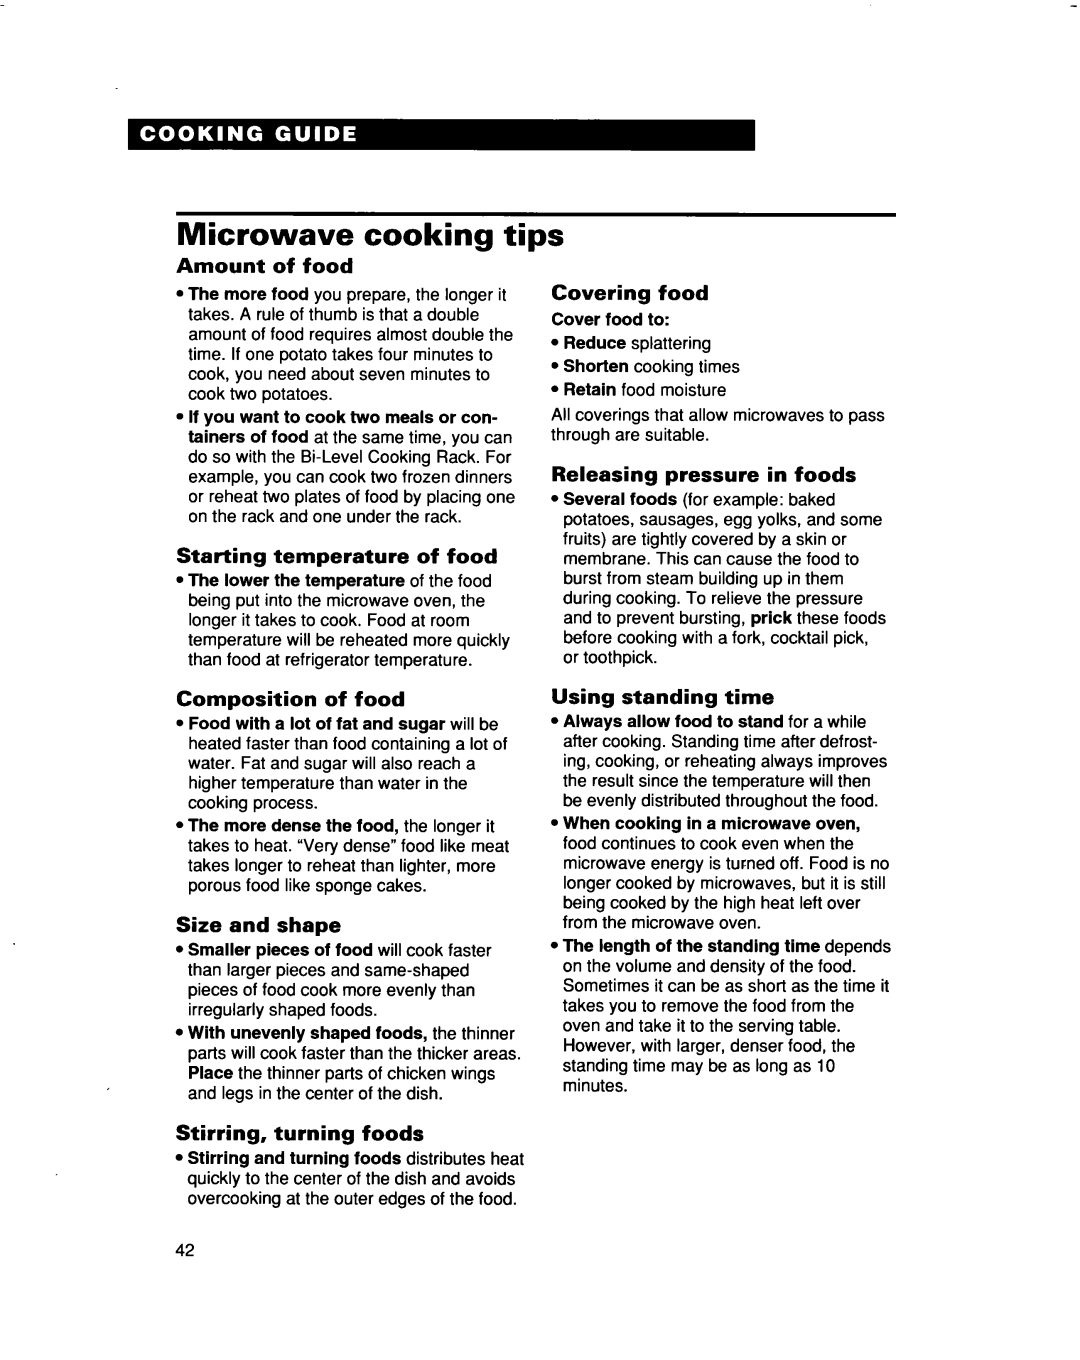 Whirlpool MHEI IRD Microwave cooking tips, Amount of food, Starting temperature of food, Covering food, Size and shape 